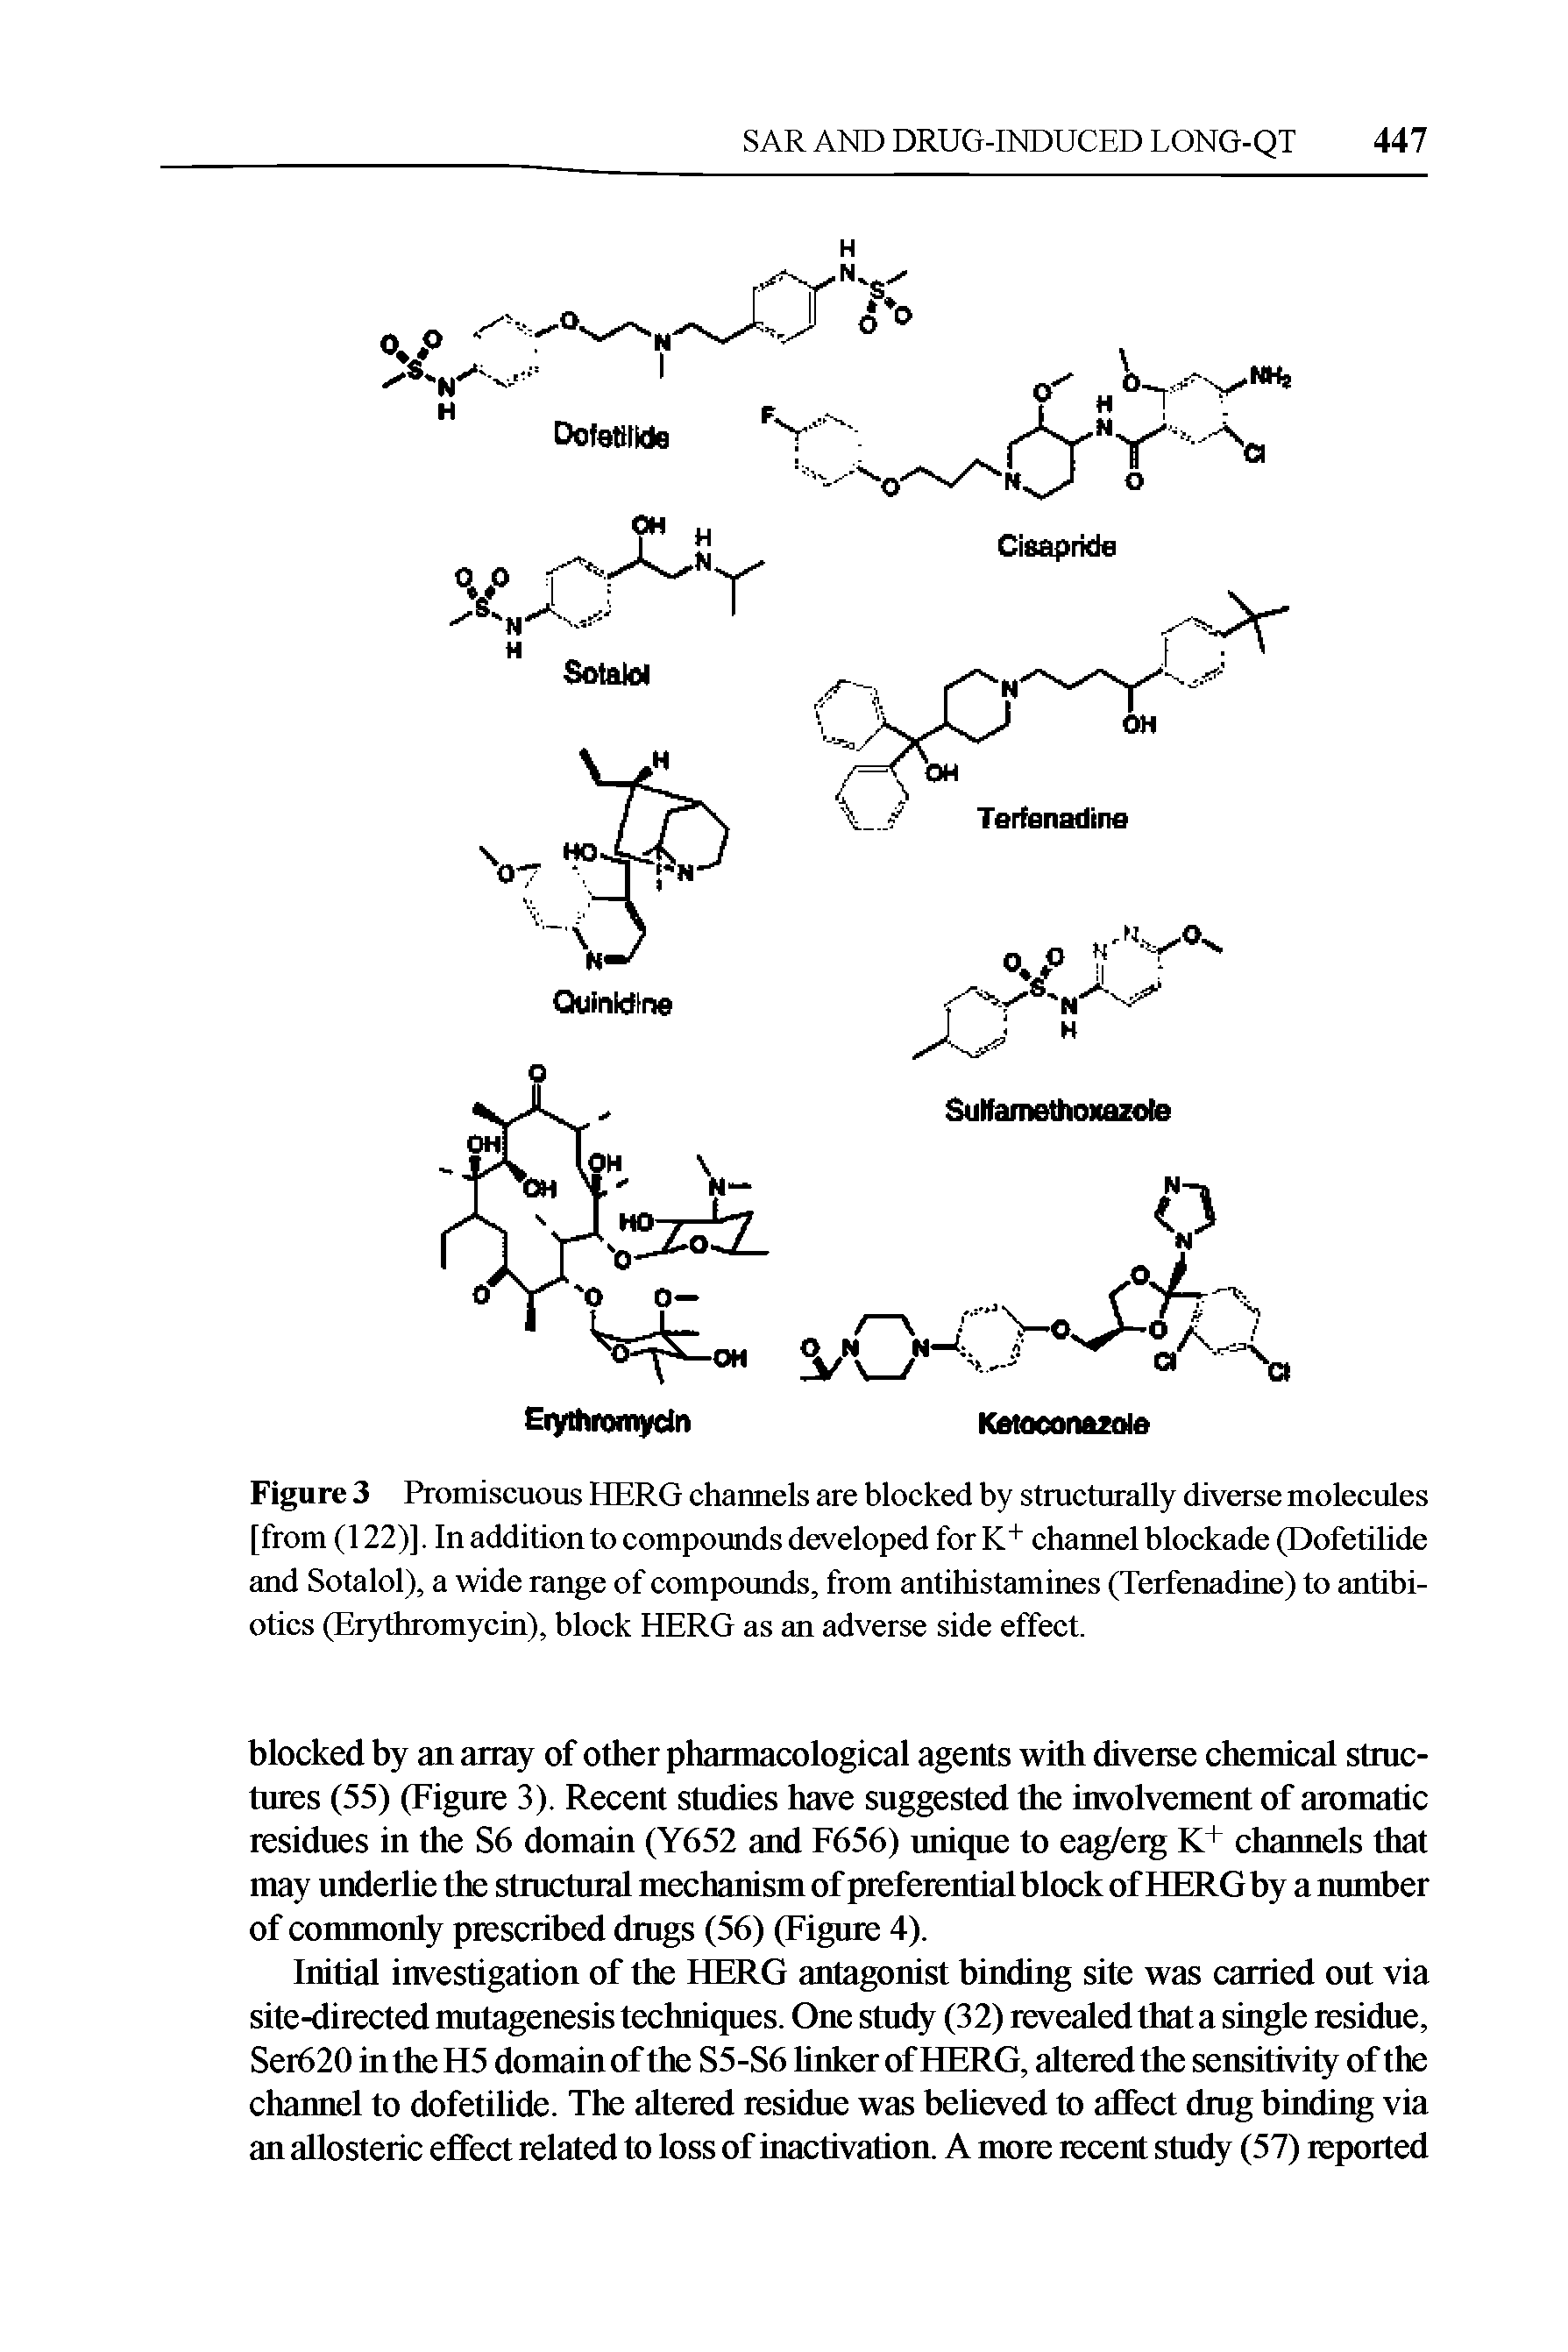 Figure 3 Promiscuous HERG channels are blocked by structurally diverse molecules [from (122)]. In addition to compounds developed for K+ channel blockade (Dofetilide and Sotalol), a wide range of compounds, from antihistamines (Terfenadine) to antibiotics (Erythromycin), block HERG as an adverse side effect.